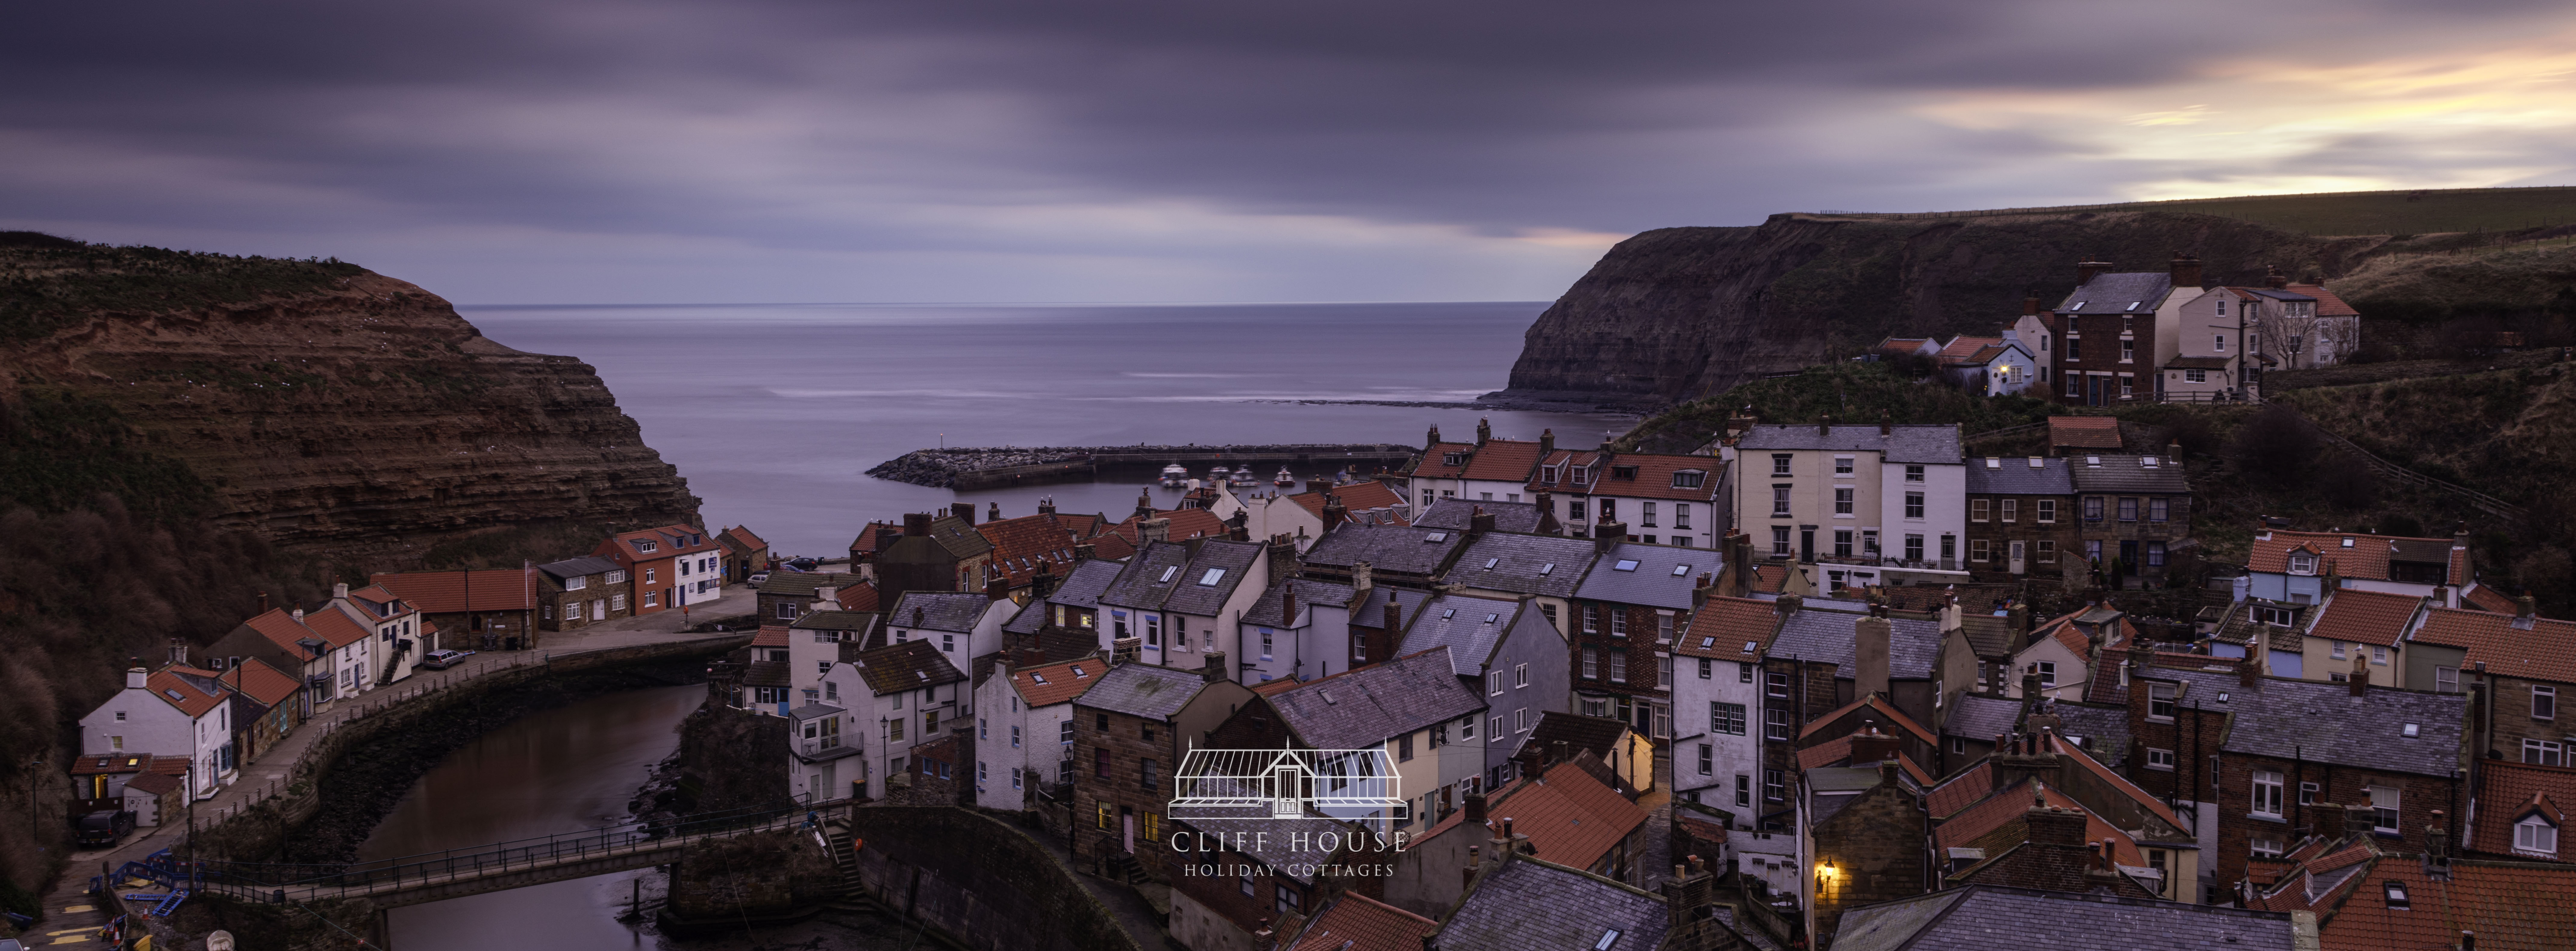 A visit to Staithes